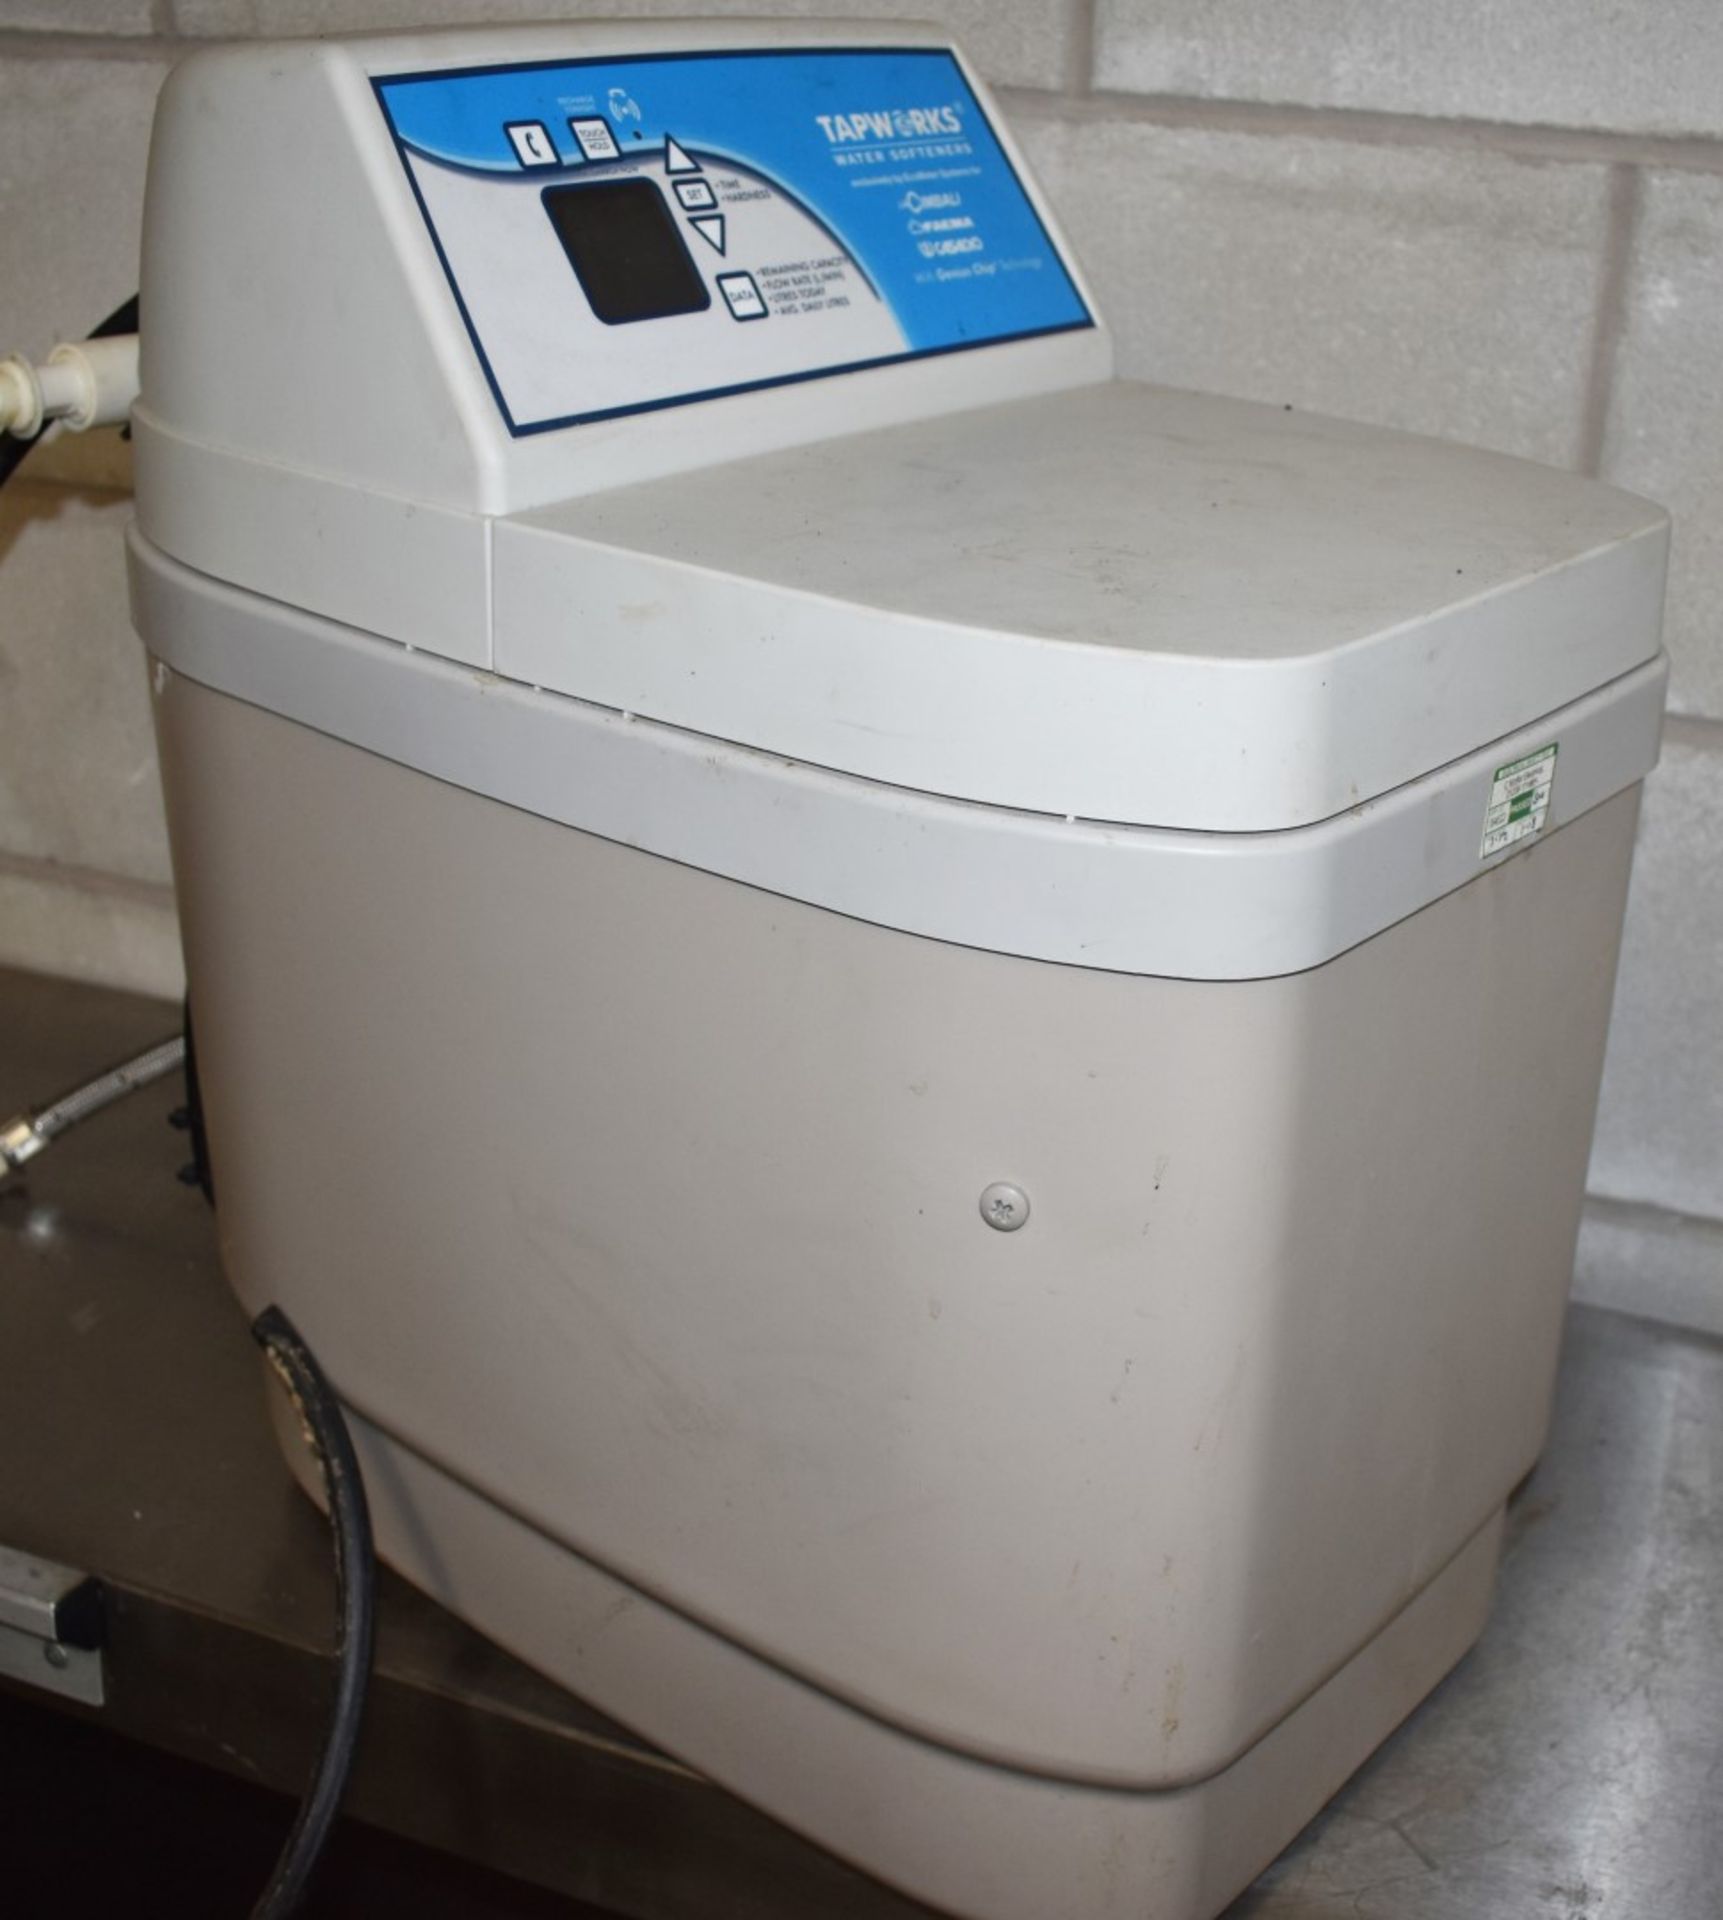 1 x Tap Works Water Softener - Ecowater Systems for LaCimbali, Faema and Casadio - CL390 - Location: